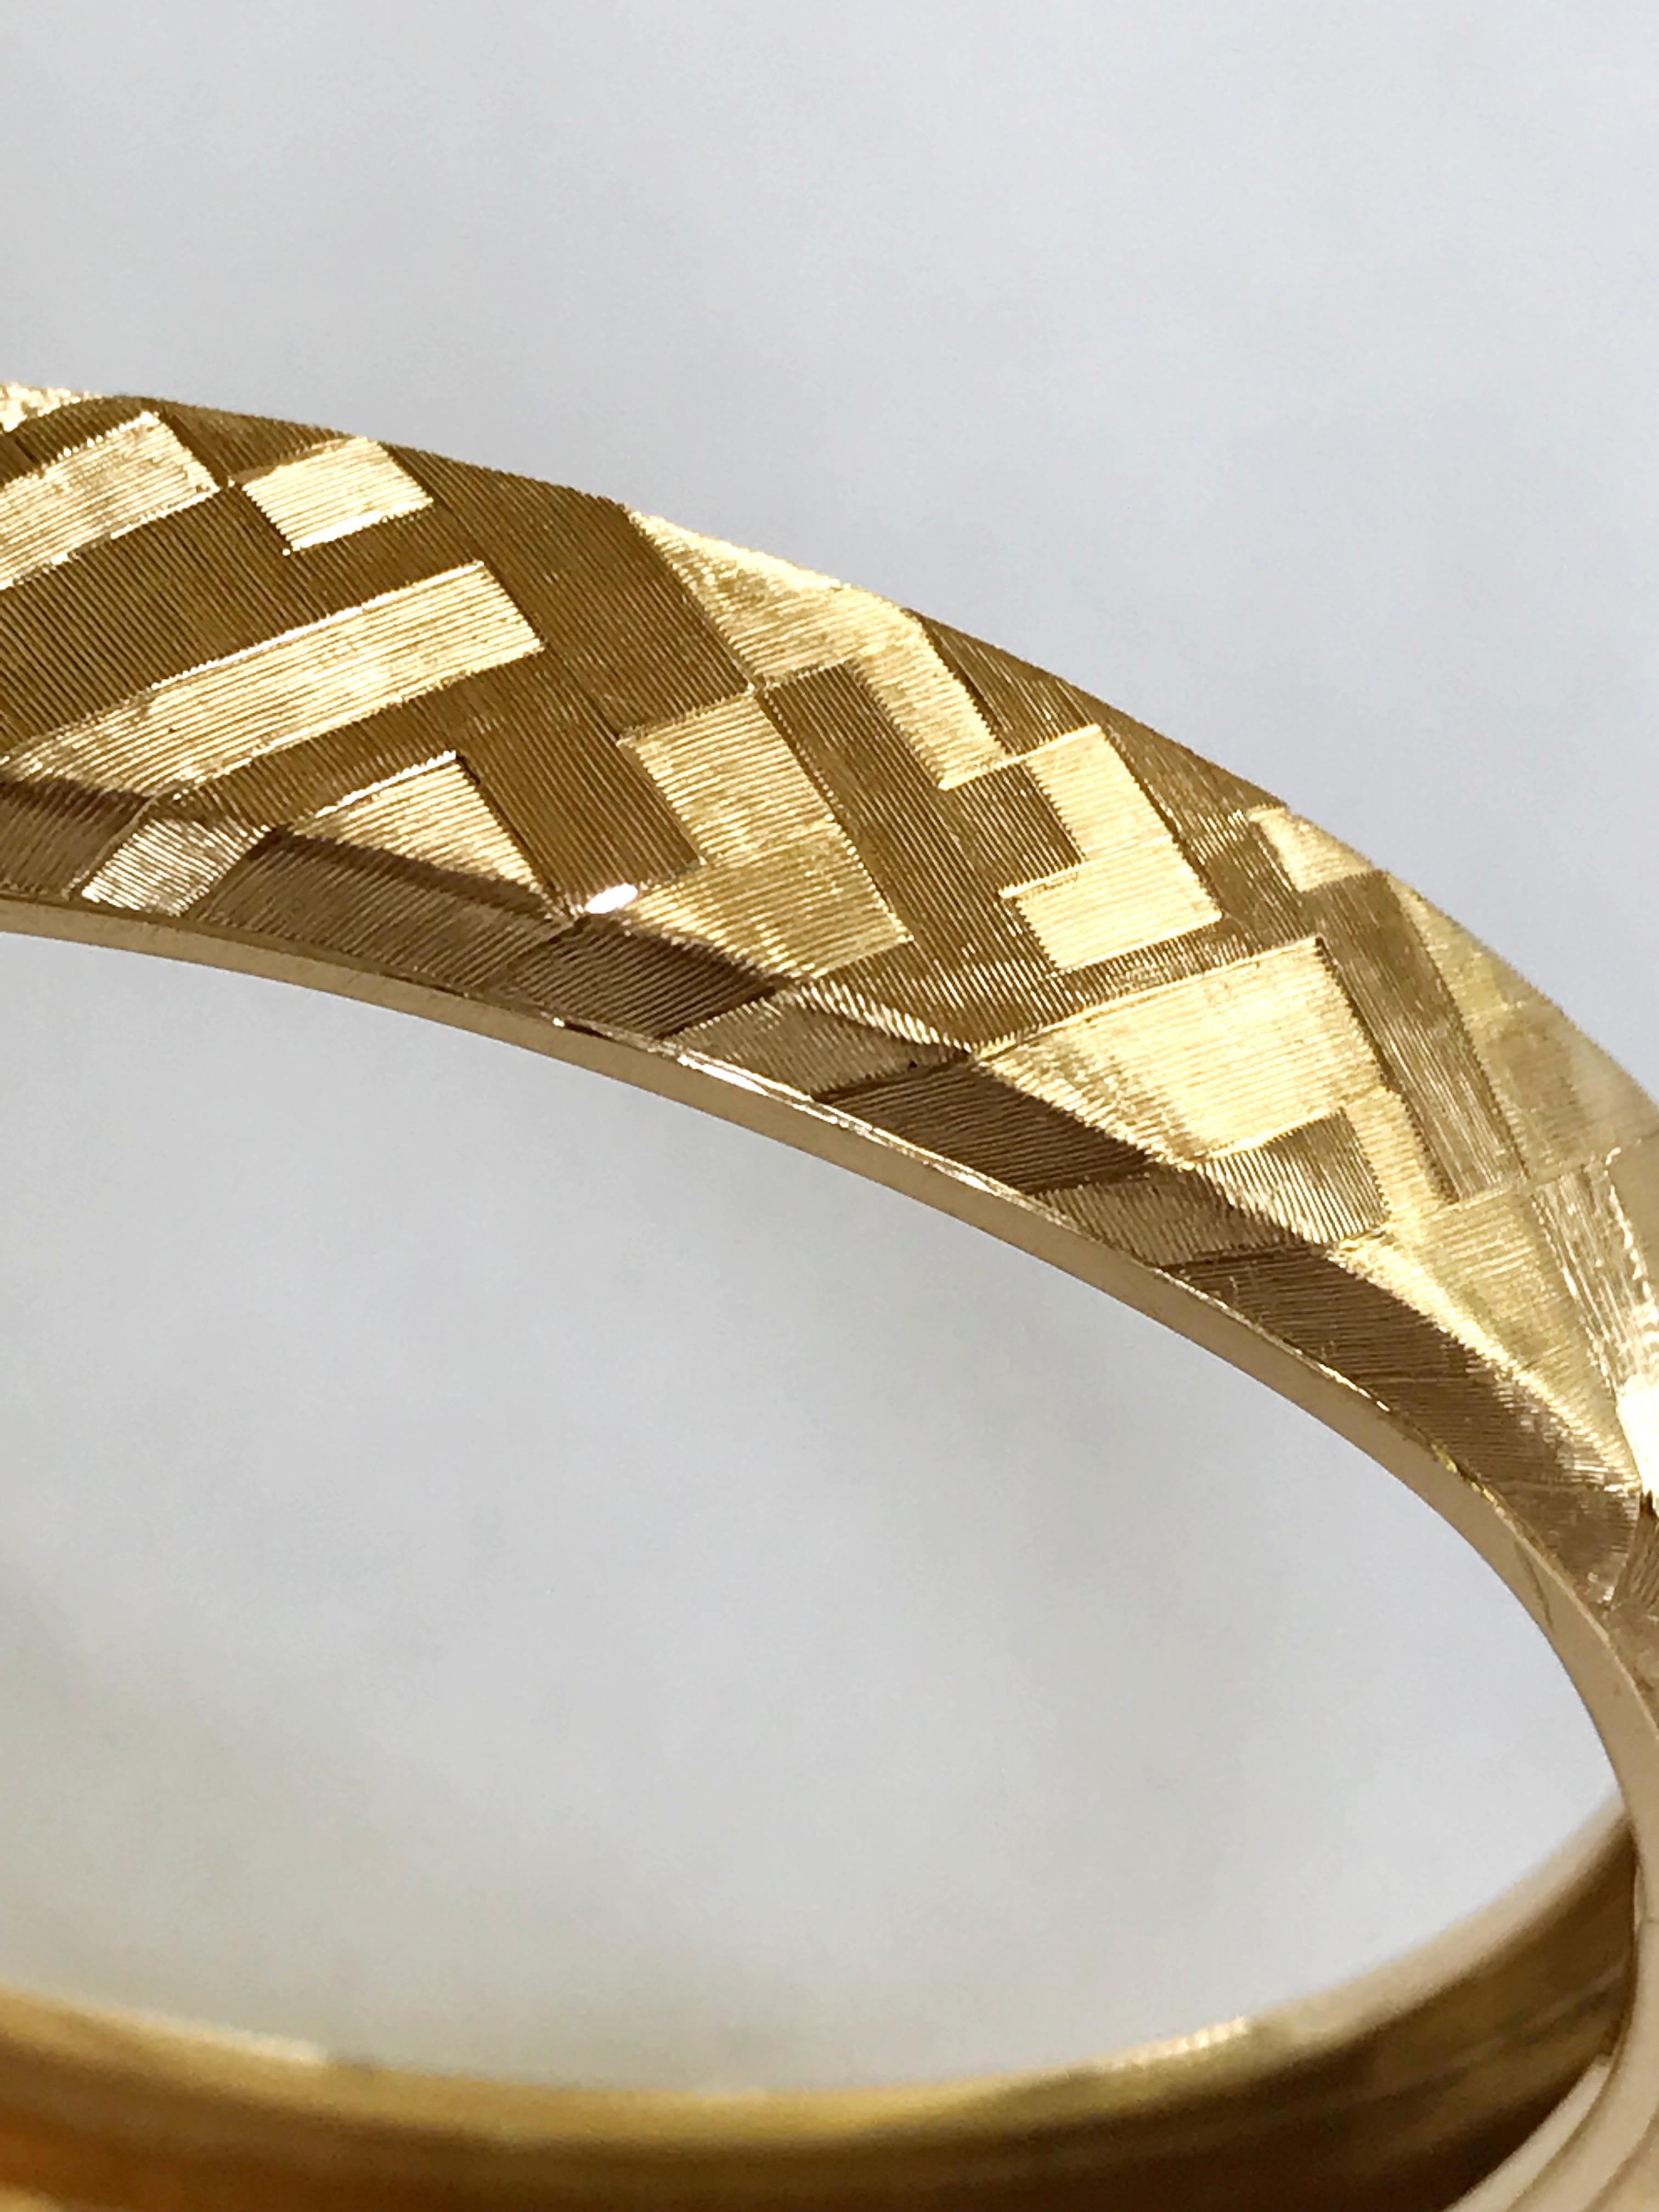 Dalben Hand Engraved Gold Bracelet In New Condition For Sale In Como, IT